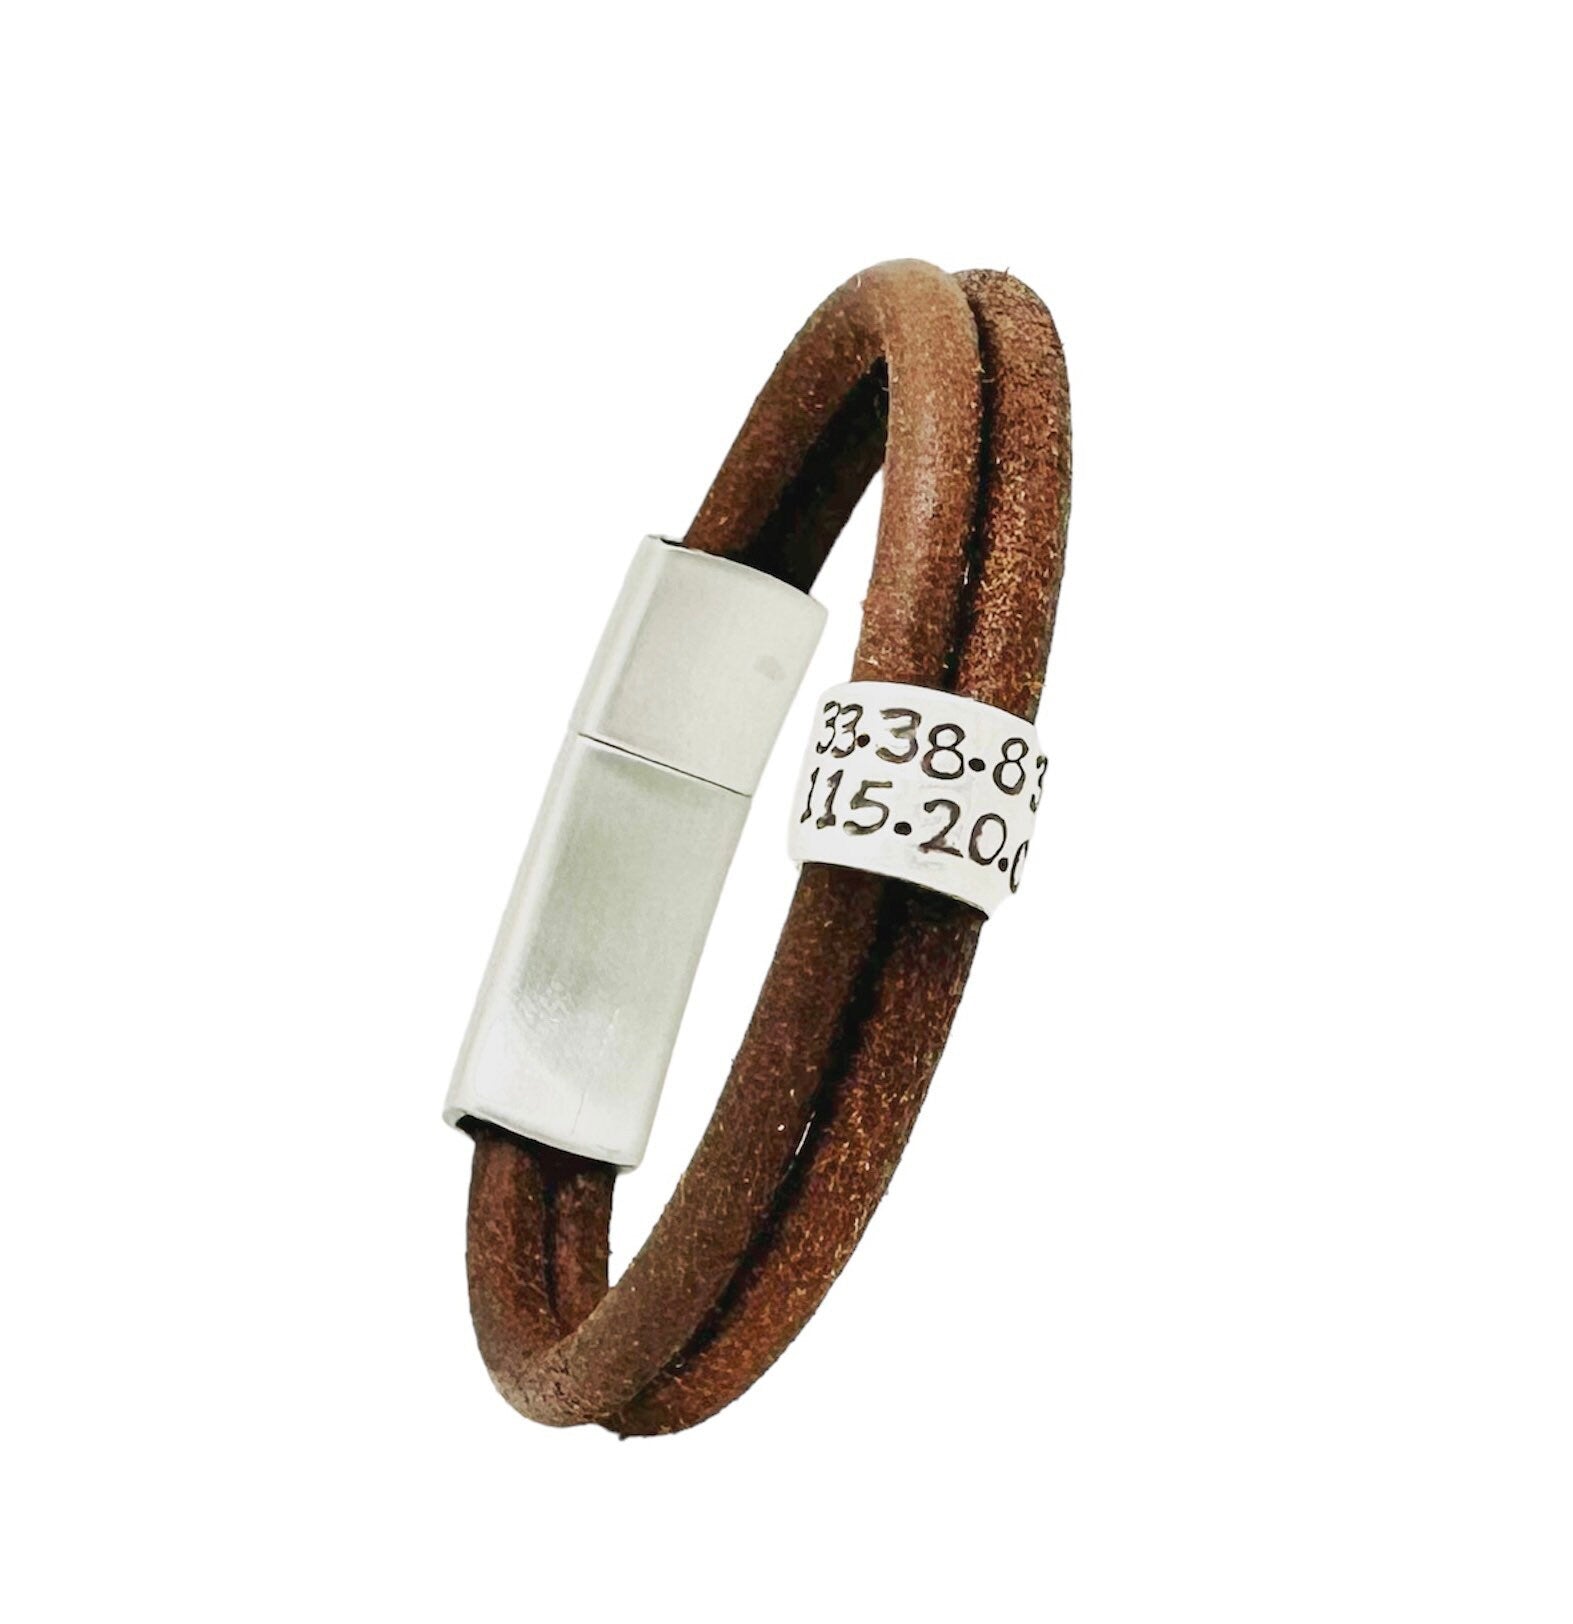 Brown Round Cord Custom Engraved Leather Bracelet With Coordinates, Personalized Leather Wrap Bracelet, Coordinates Bracelet for Men